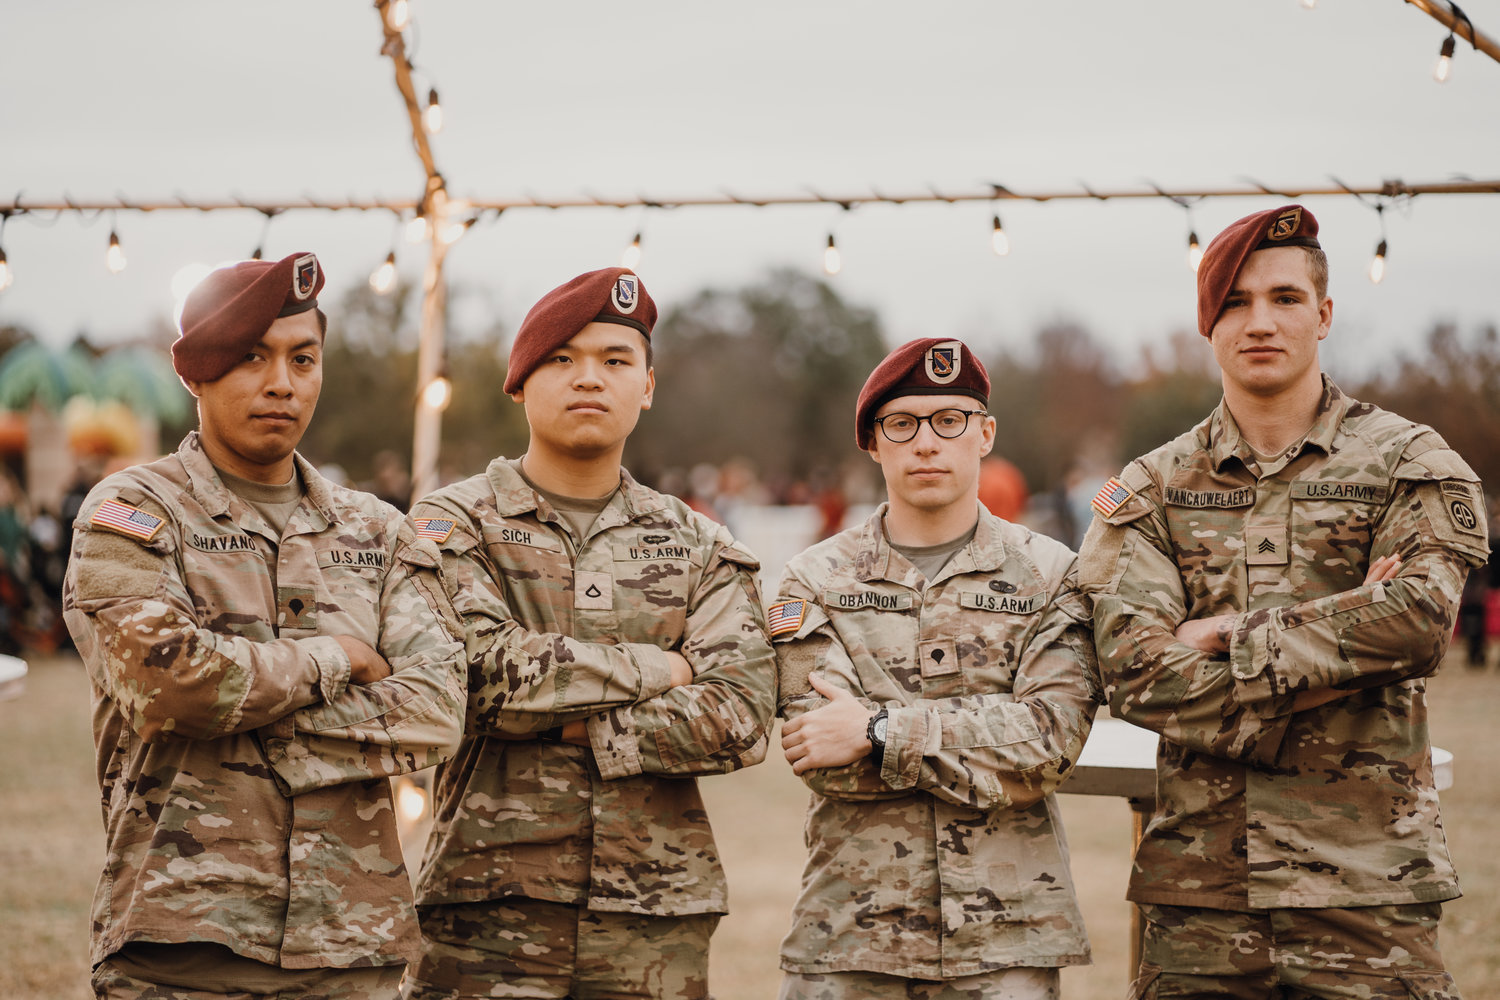 Soldiers with the 82nd Airborne Division.
Marciano Shavano, Jackson Sich, Dillion Obannon and Kyle Vancauwelaert